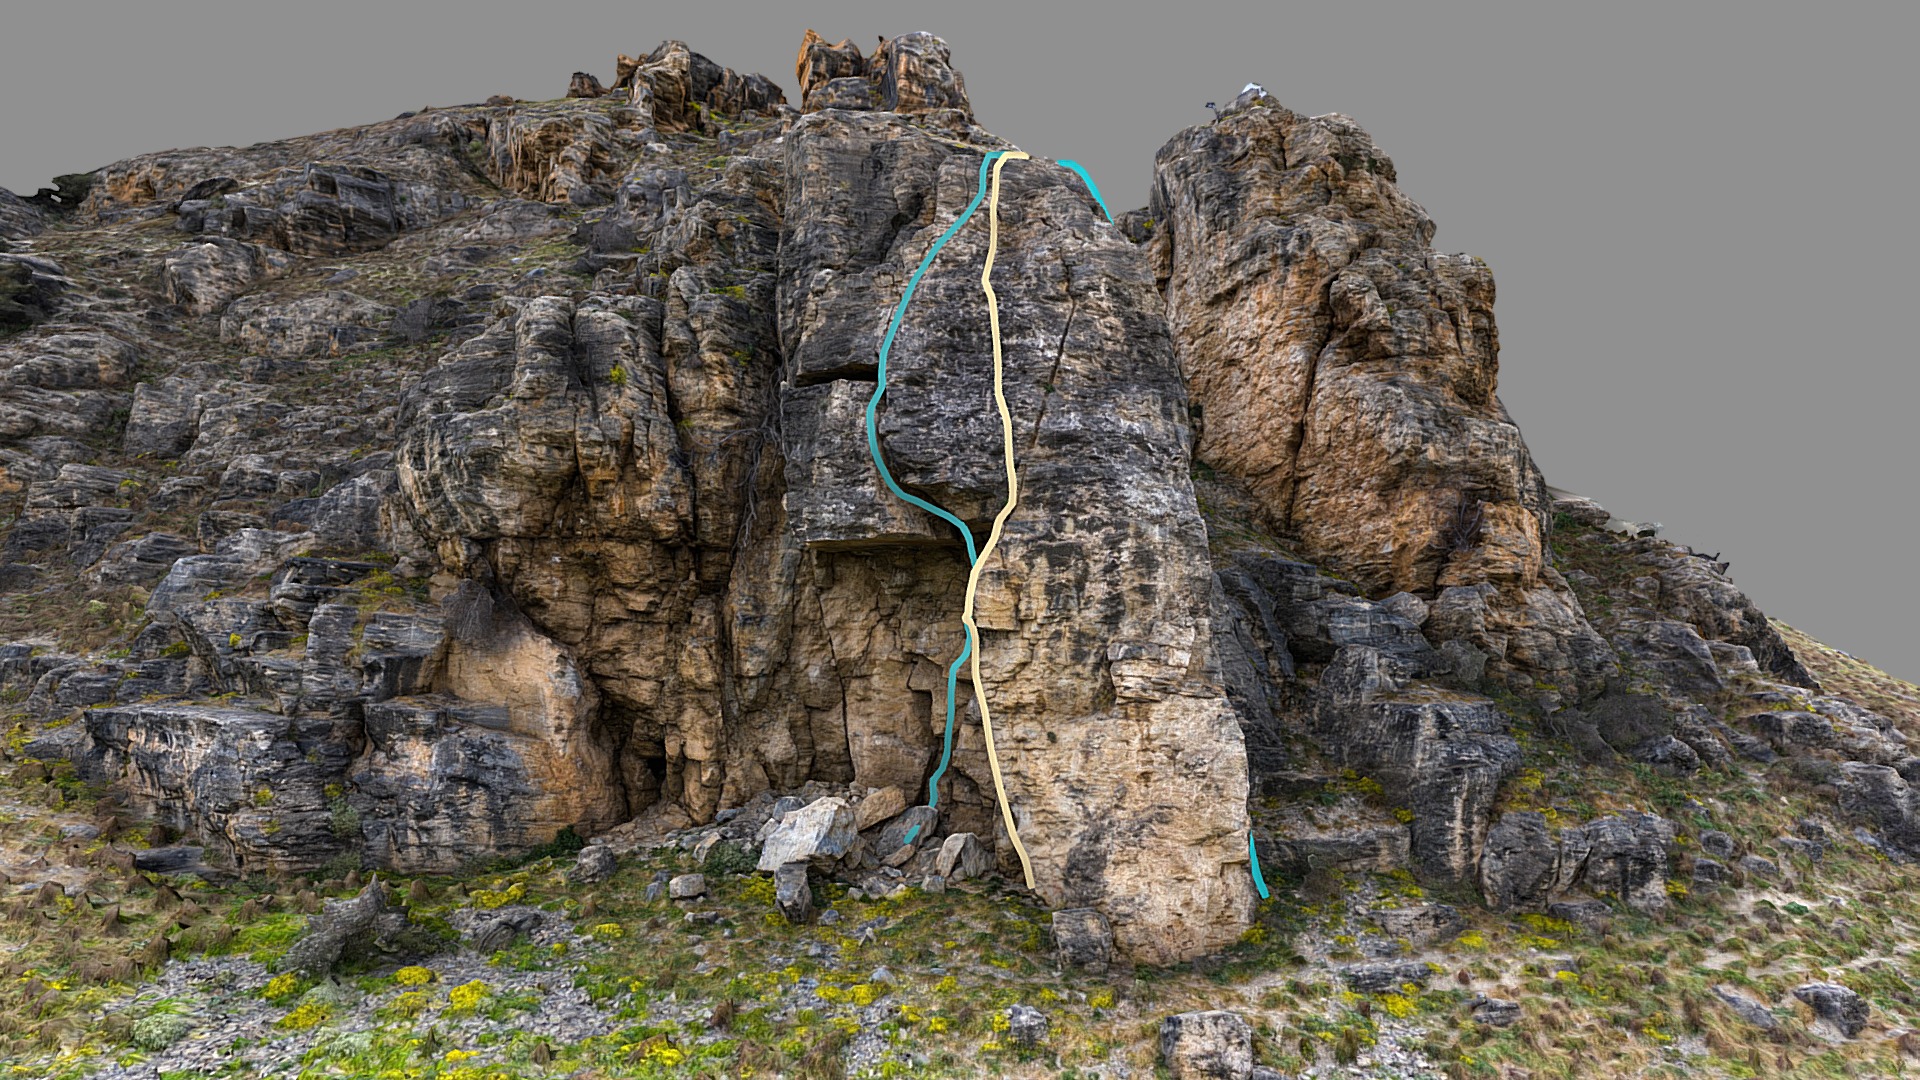 3D model VirtualMount Gintiki Climbing Sector 1 - This is a 3D model of the VirtualMount Gintiki Climbing Sector 1. The 3D model is about a large rock with a rope attached.